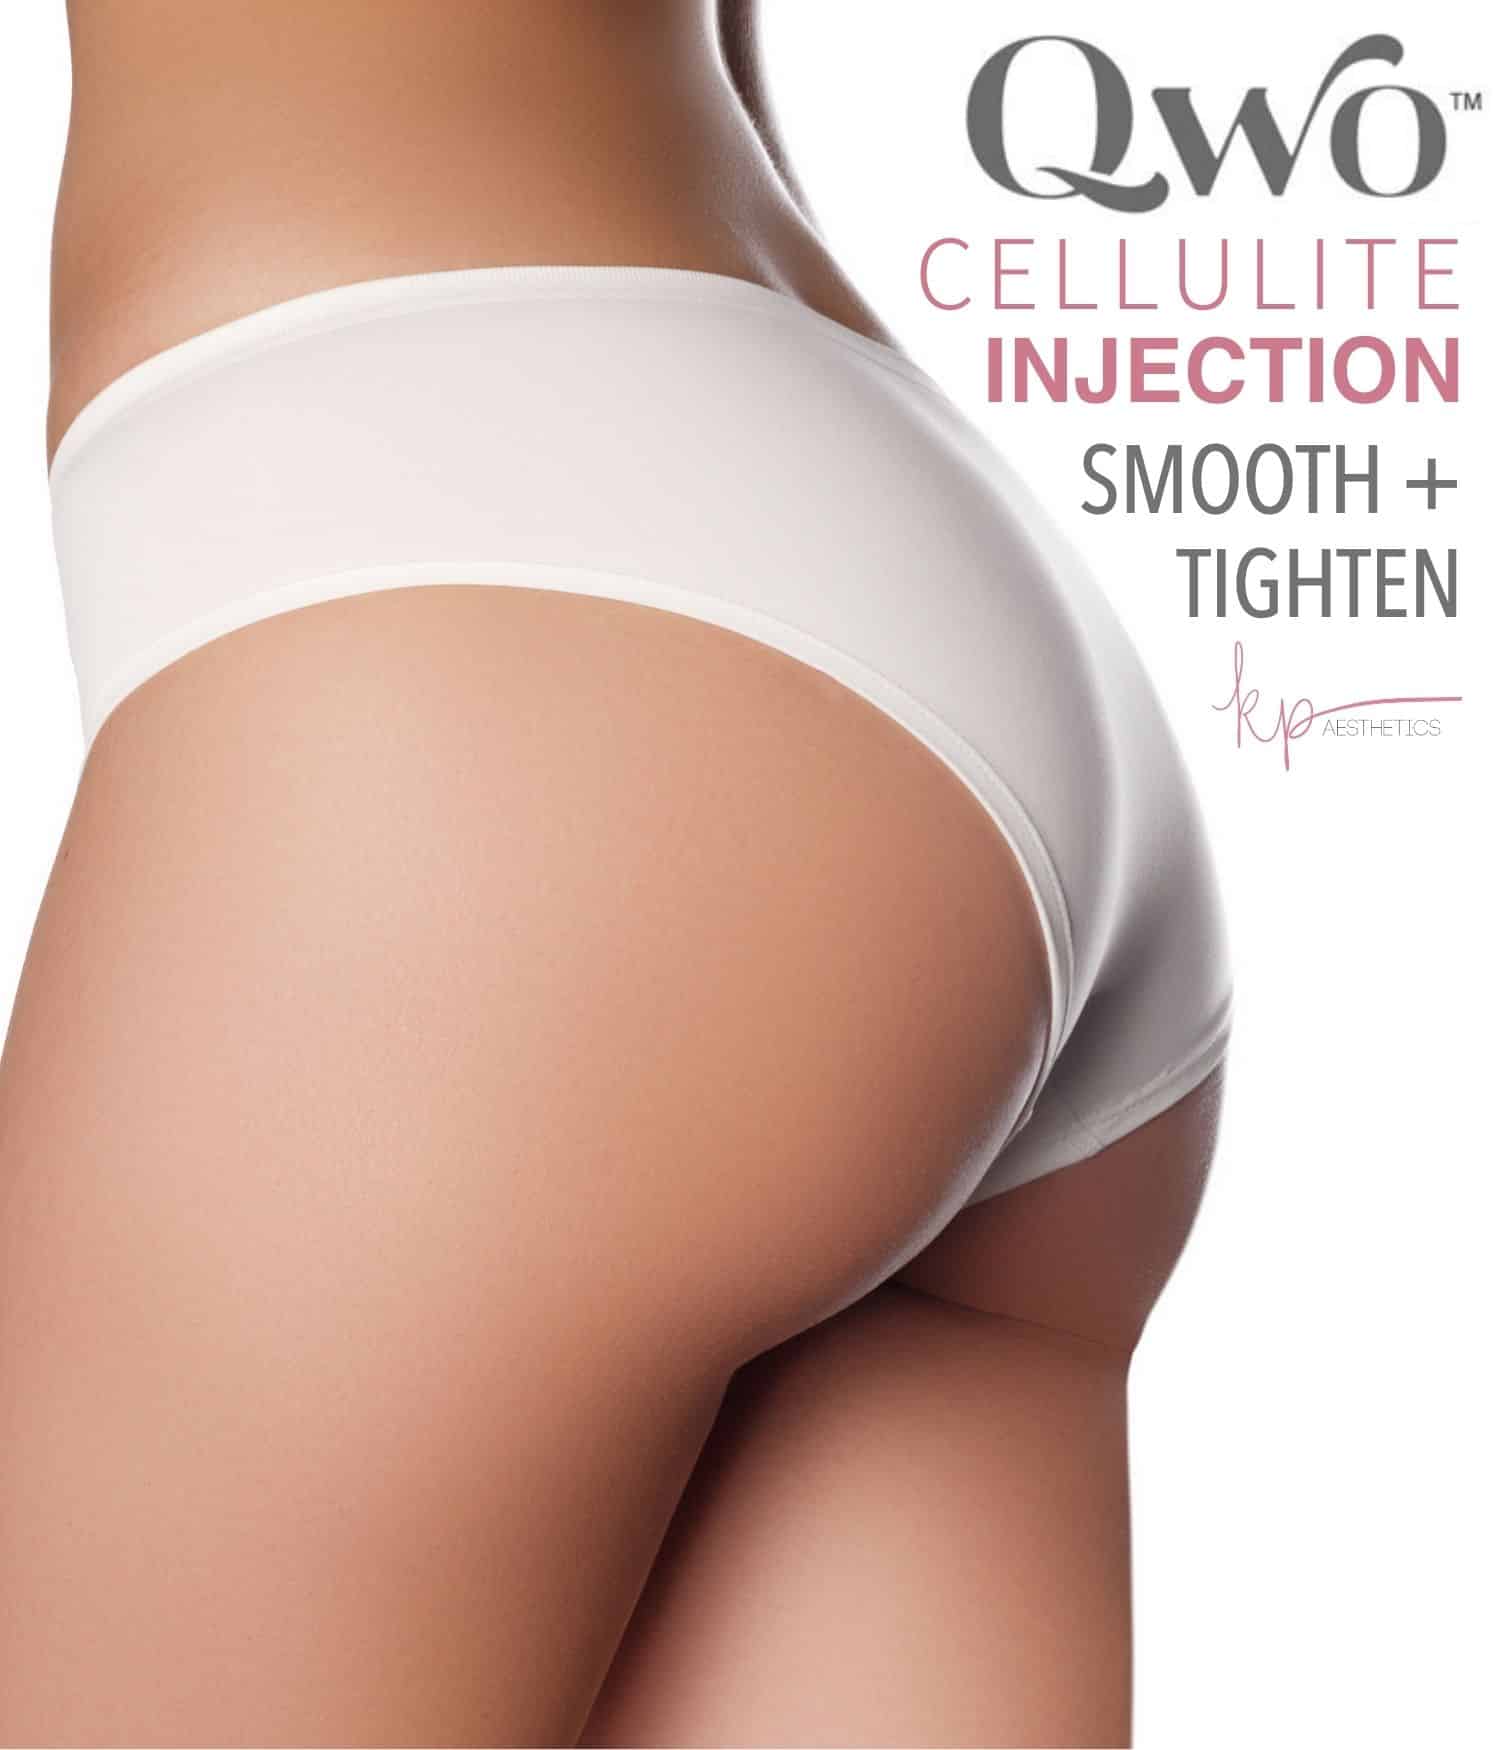 female buttocks without cellulite promoting qwo injectable treatment